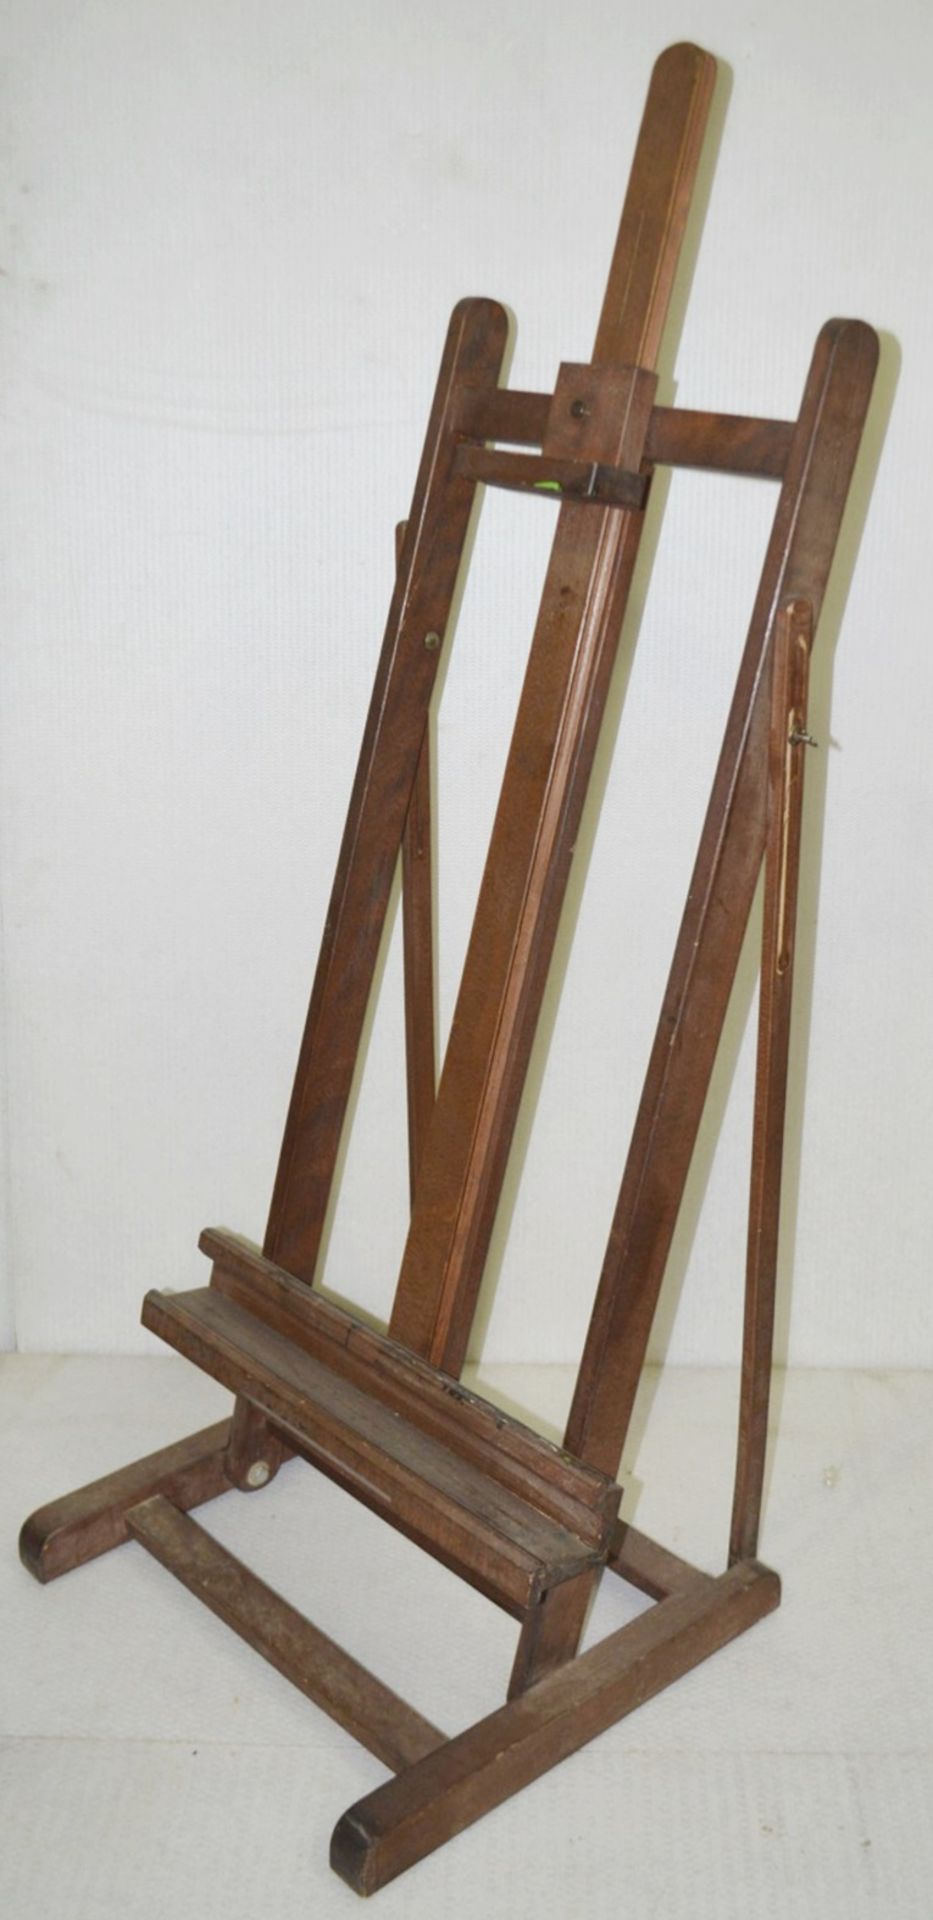 1 x Vintage Wooden Easel Display Prop - Dimensions (as pictured): H147 x W58 x D50cm - Ex-Showroom